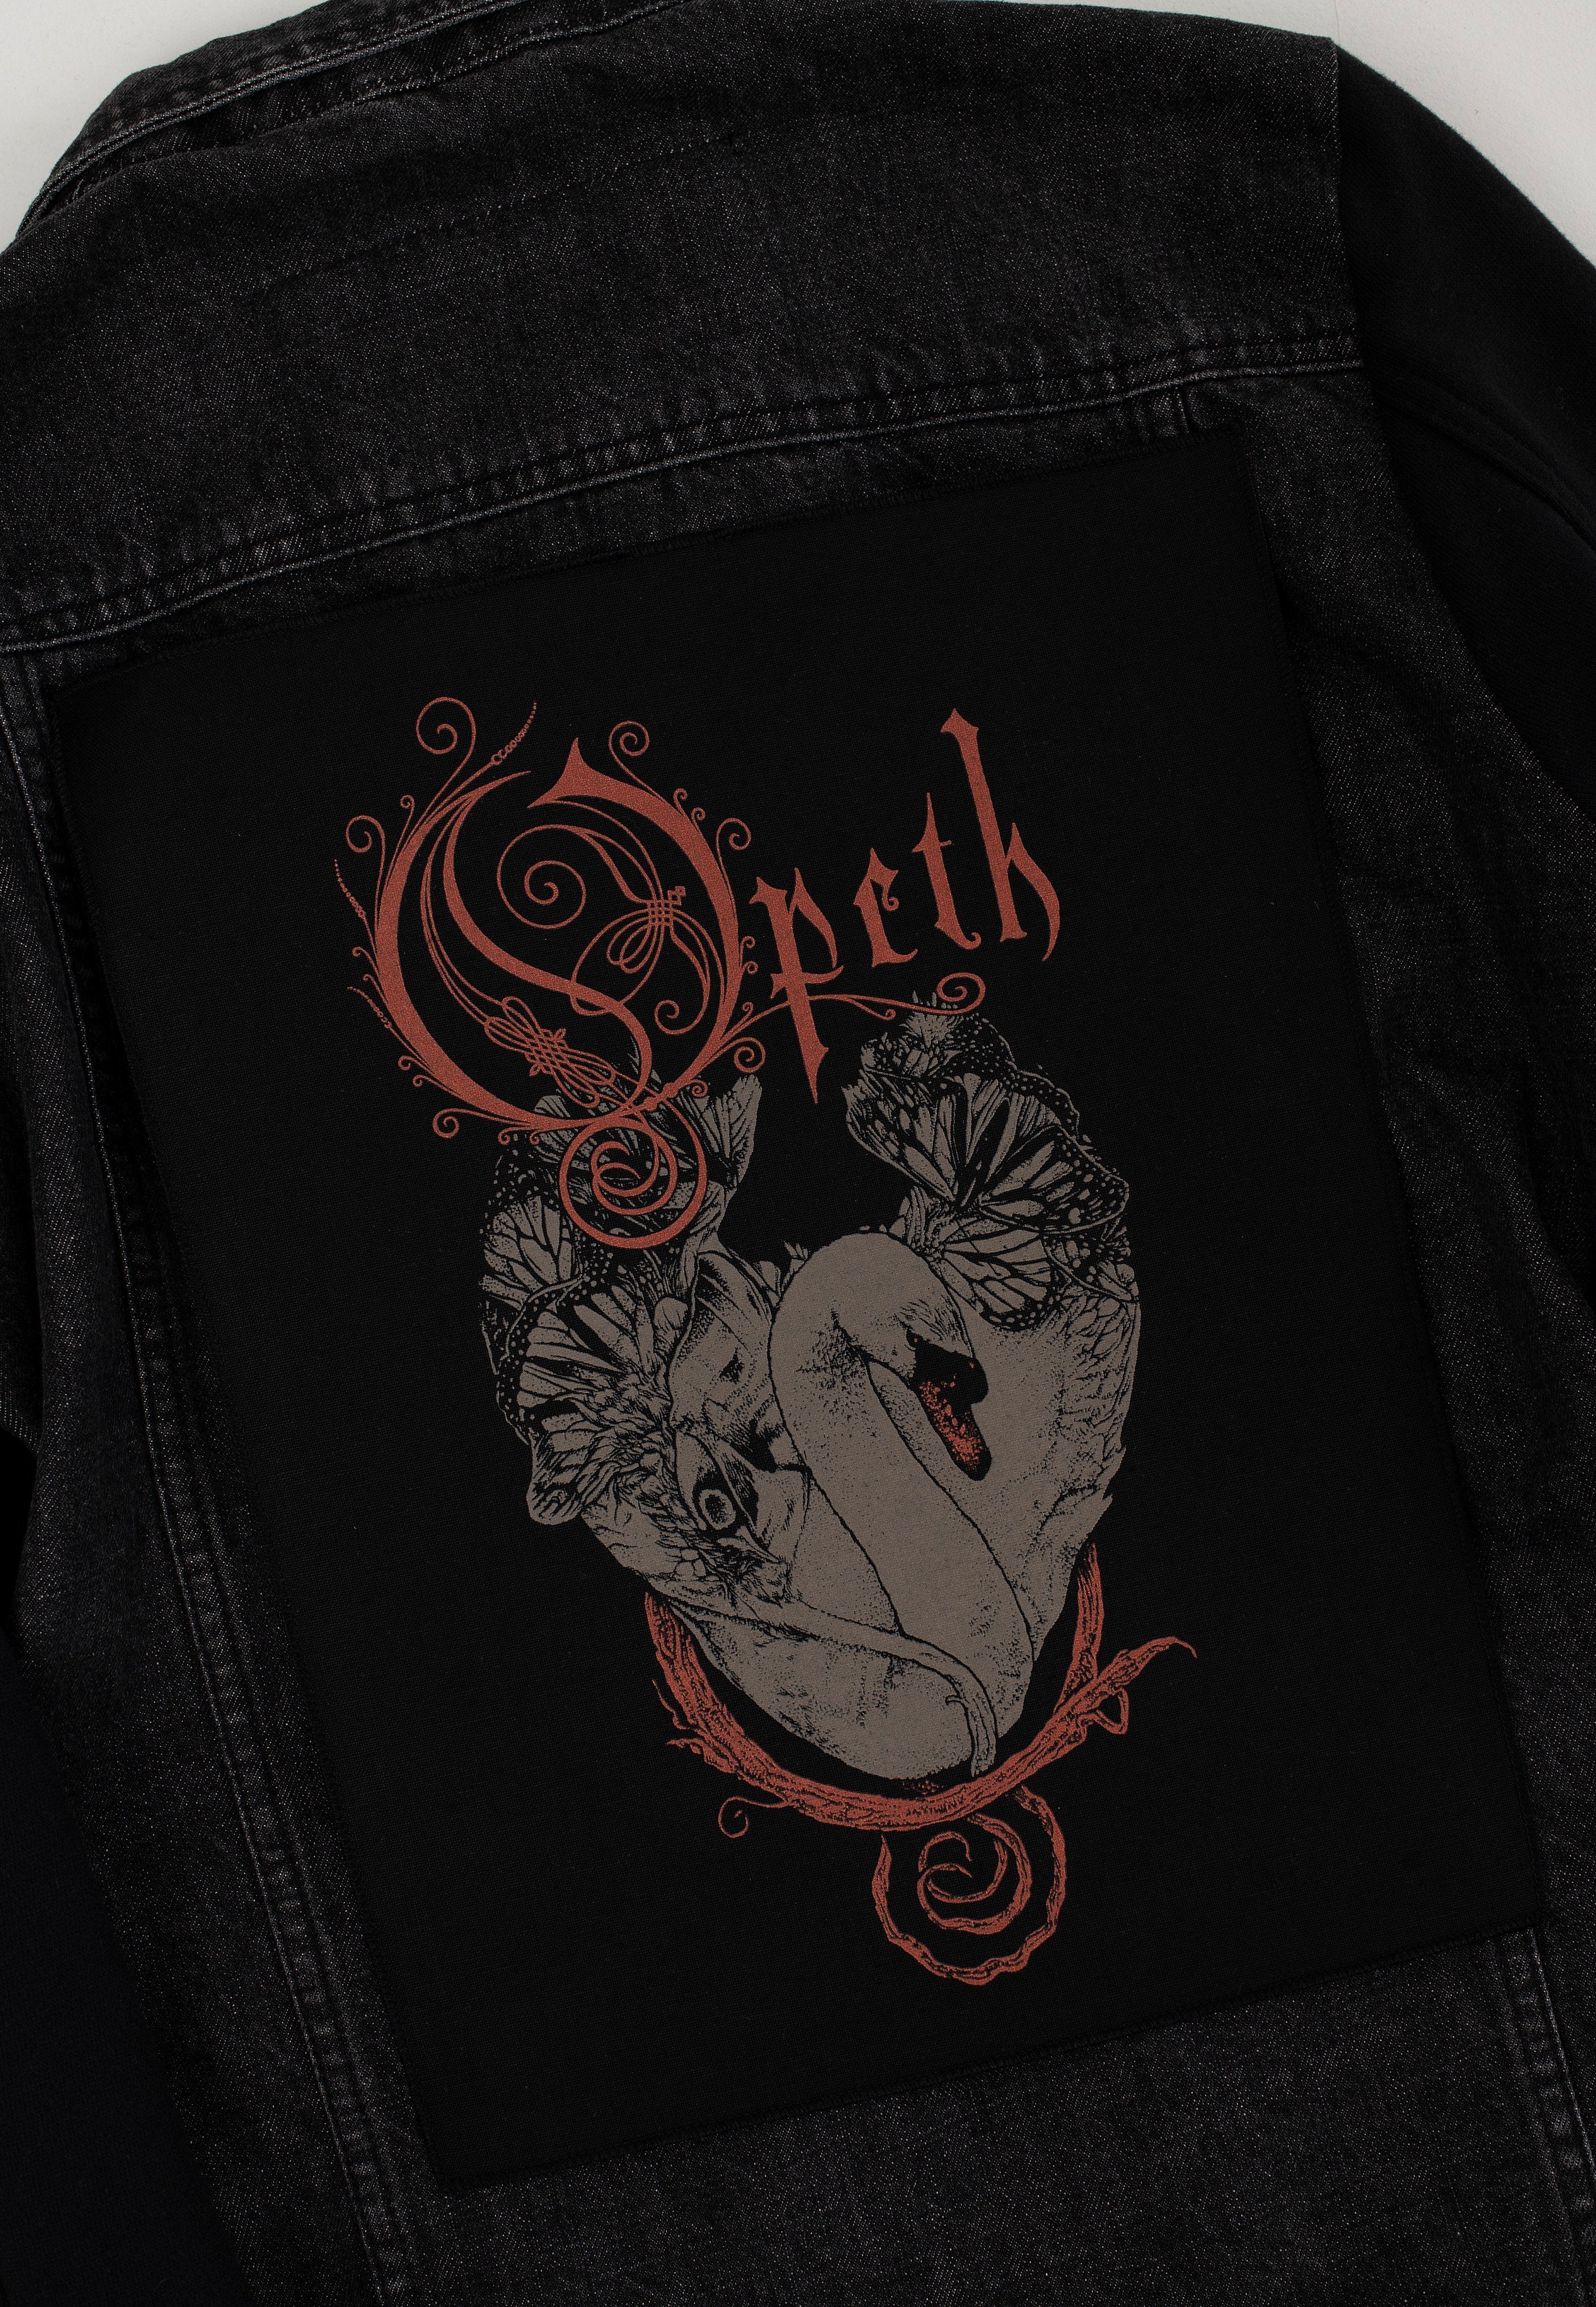 Opeth - Swan - Backpatch